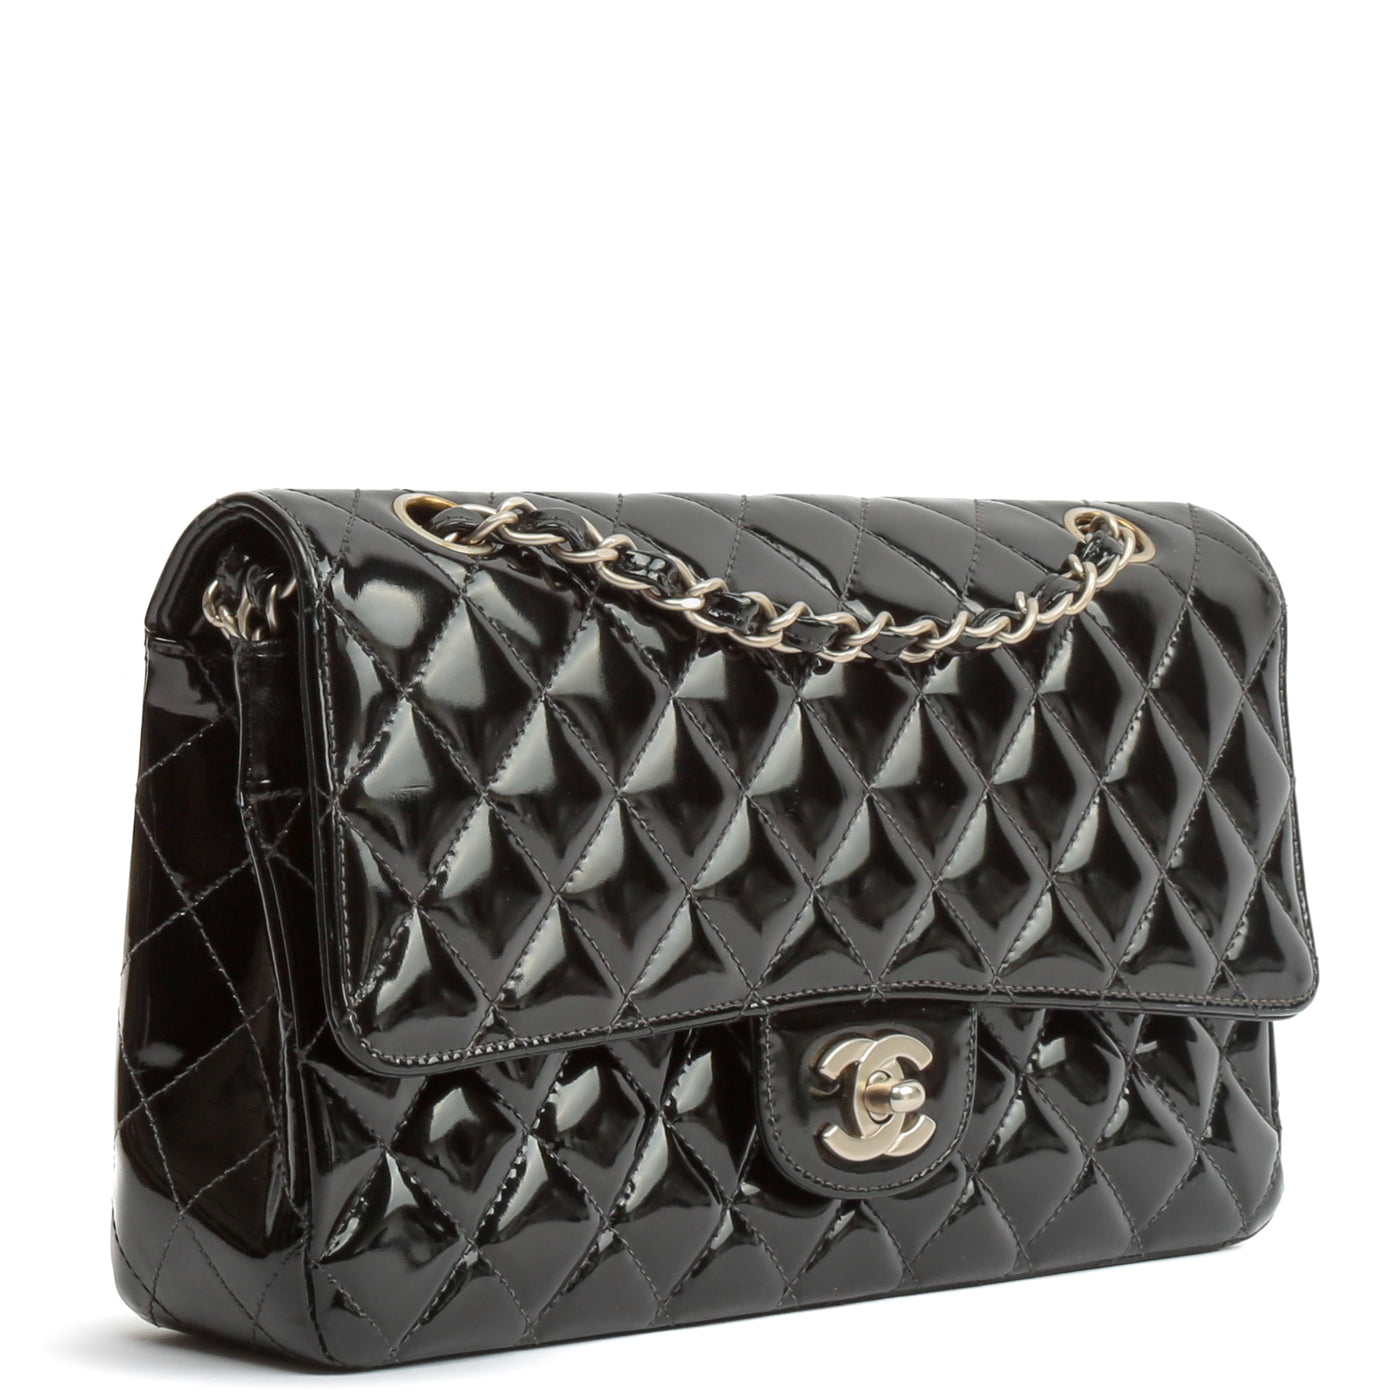 CHANEL Quilted Patent Medium Double Flap - Black